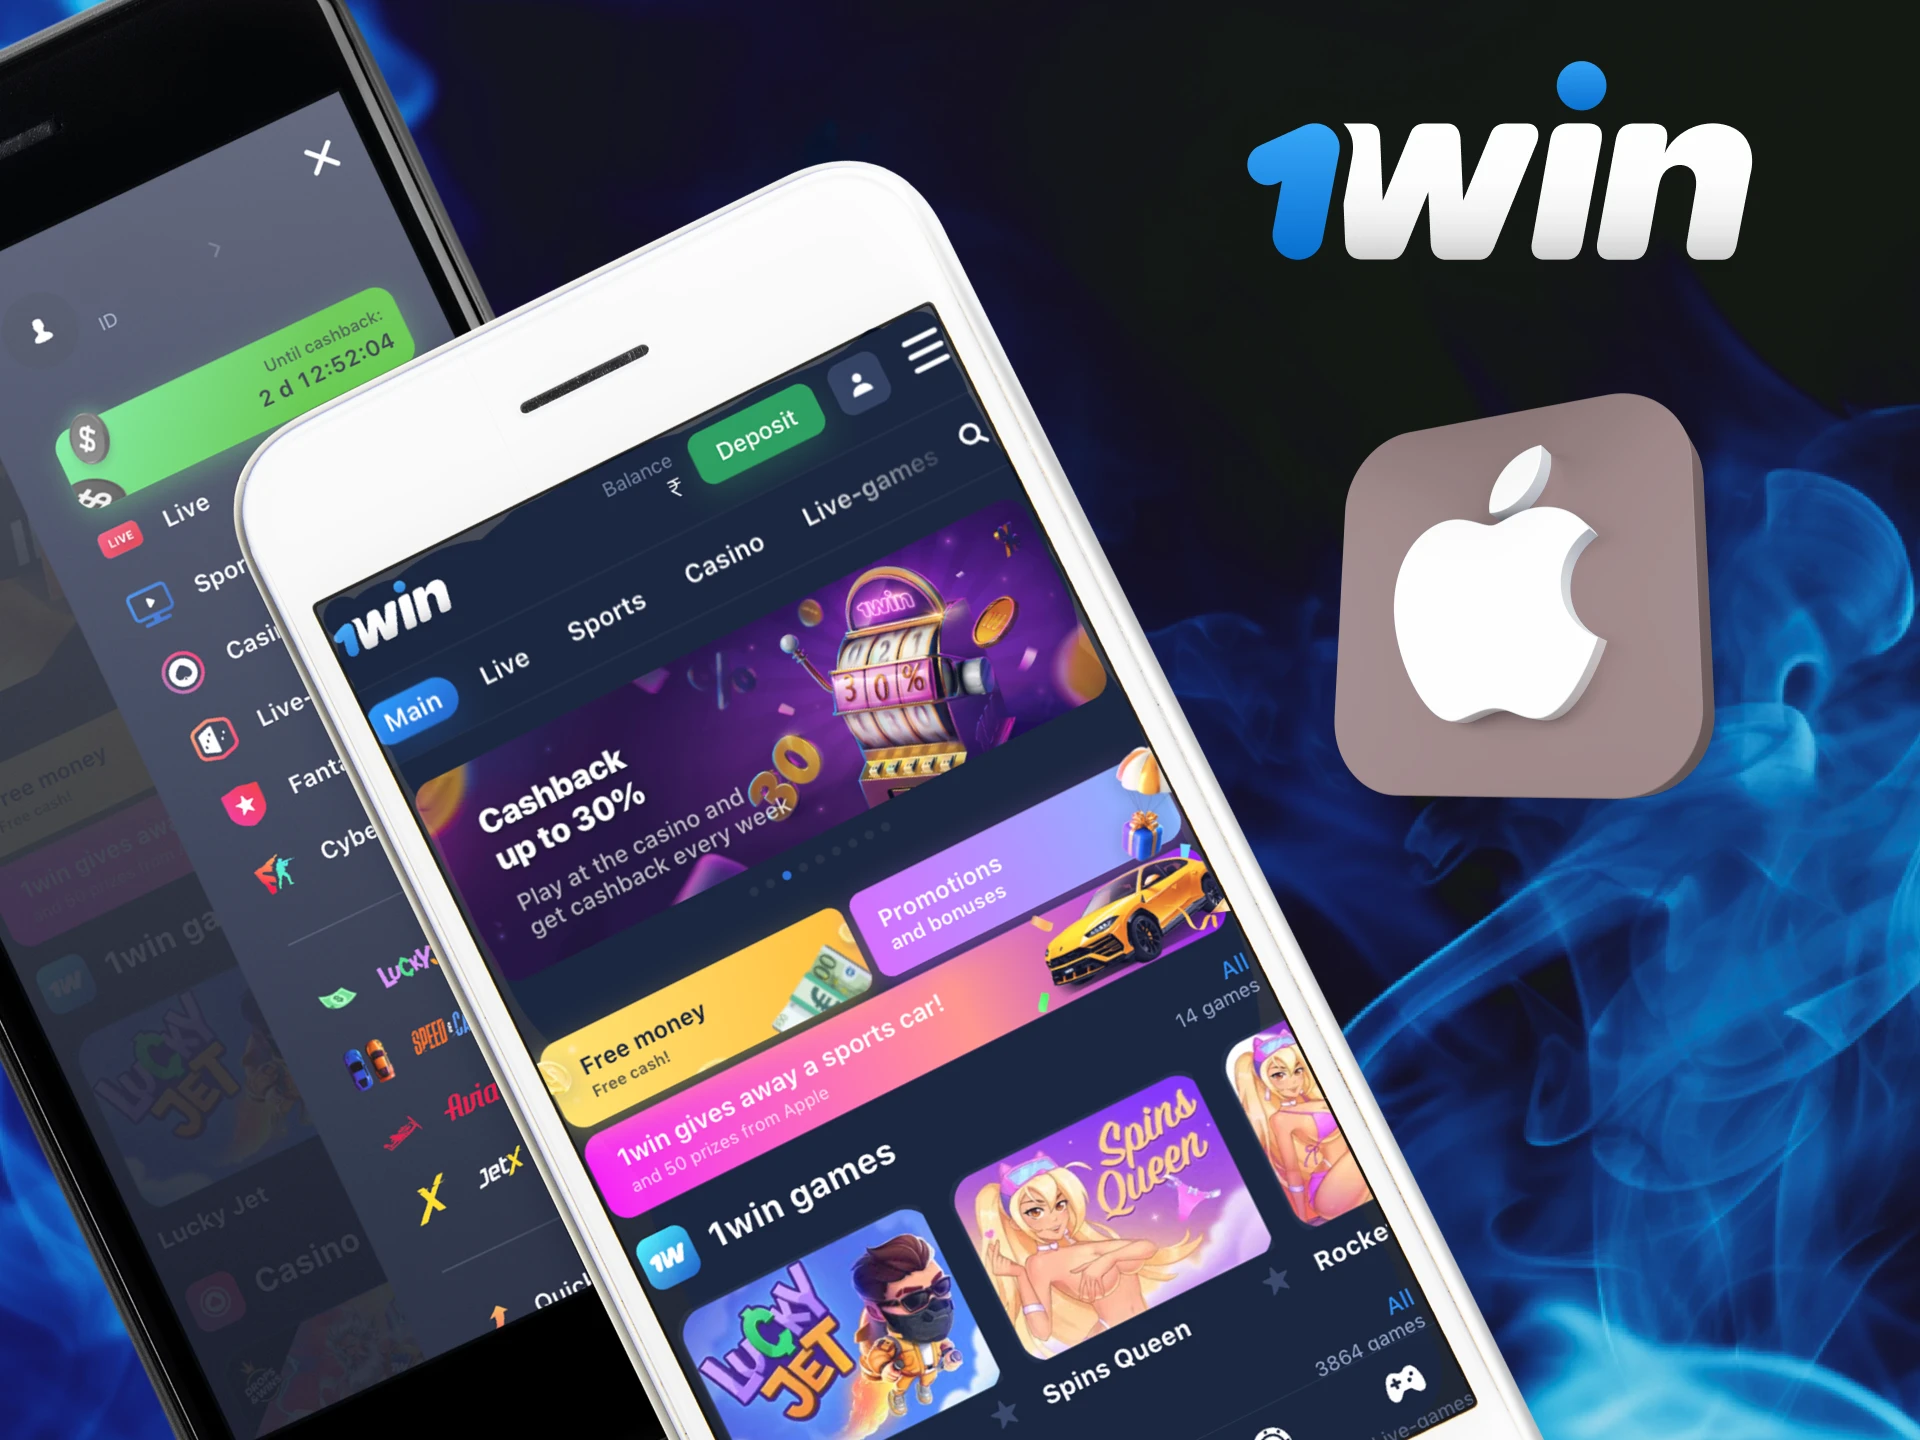 Which iOS phones support the 1Win casino app.